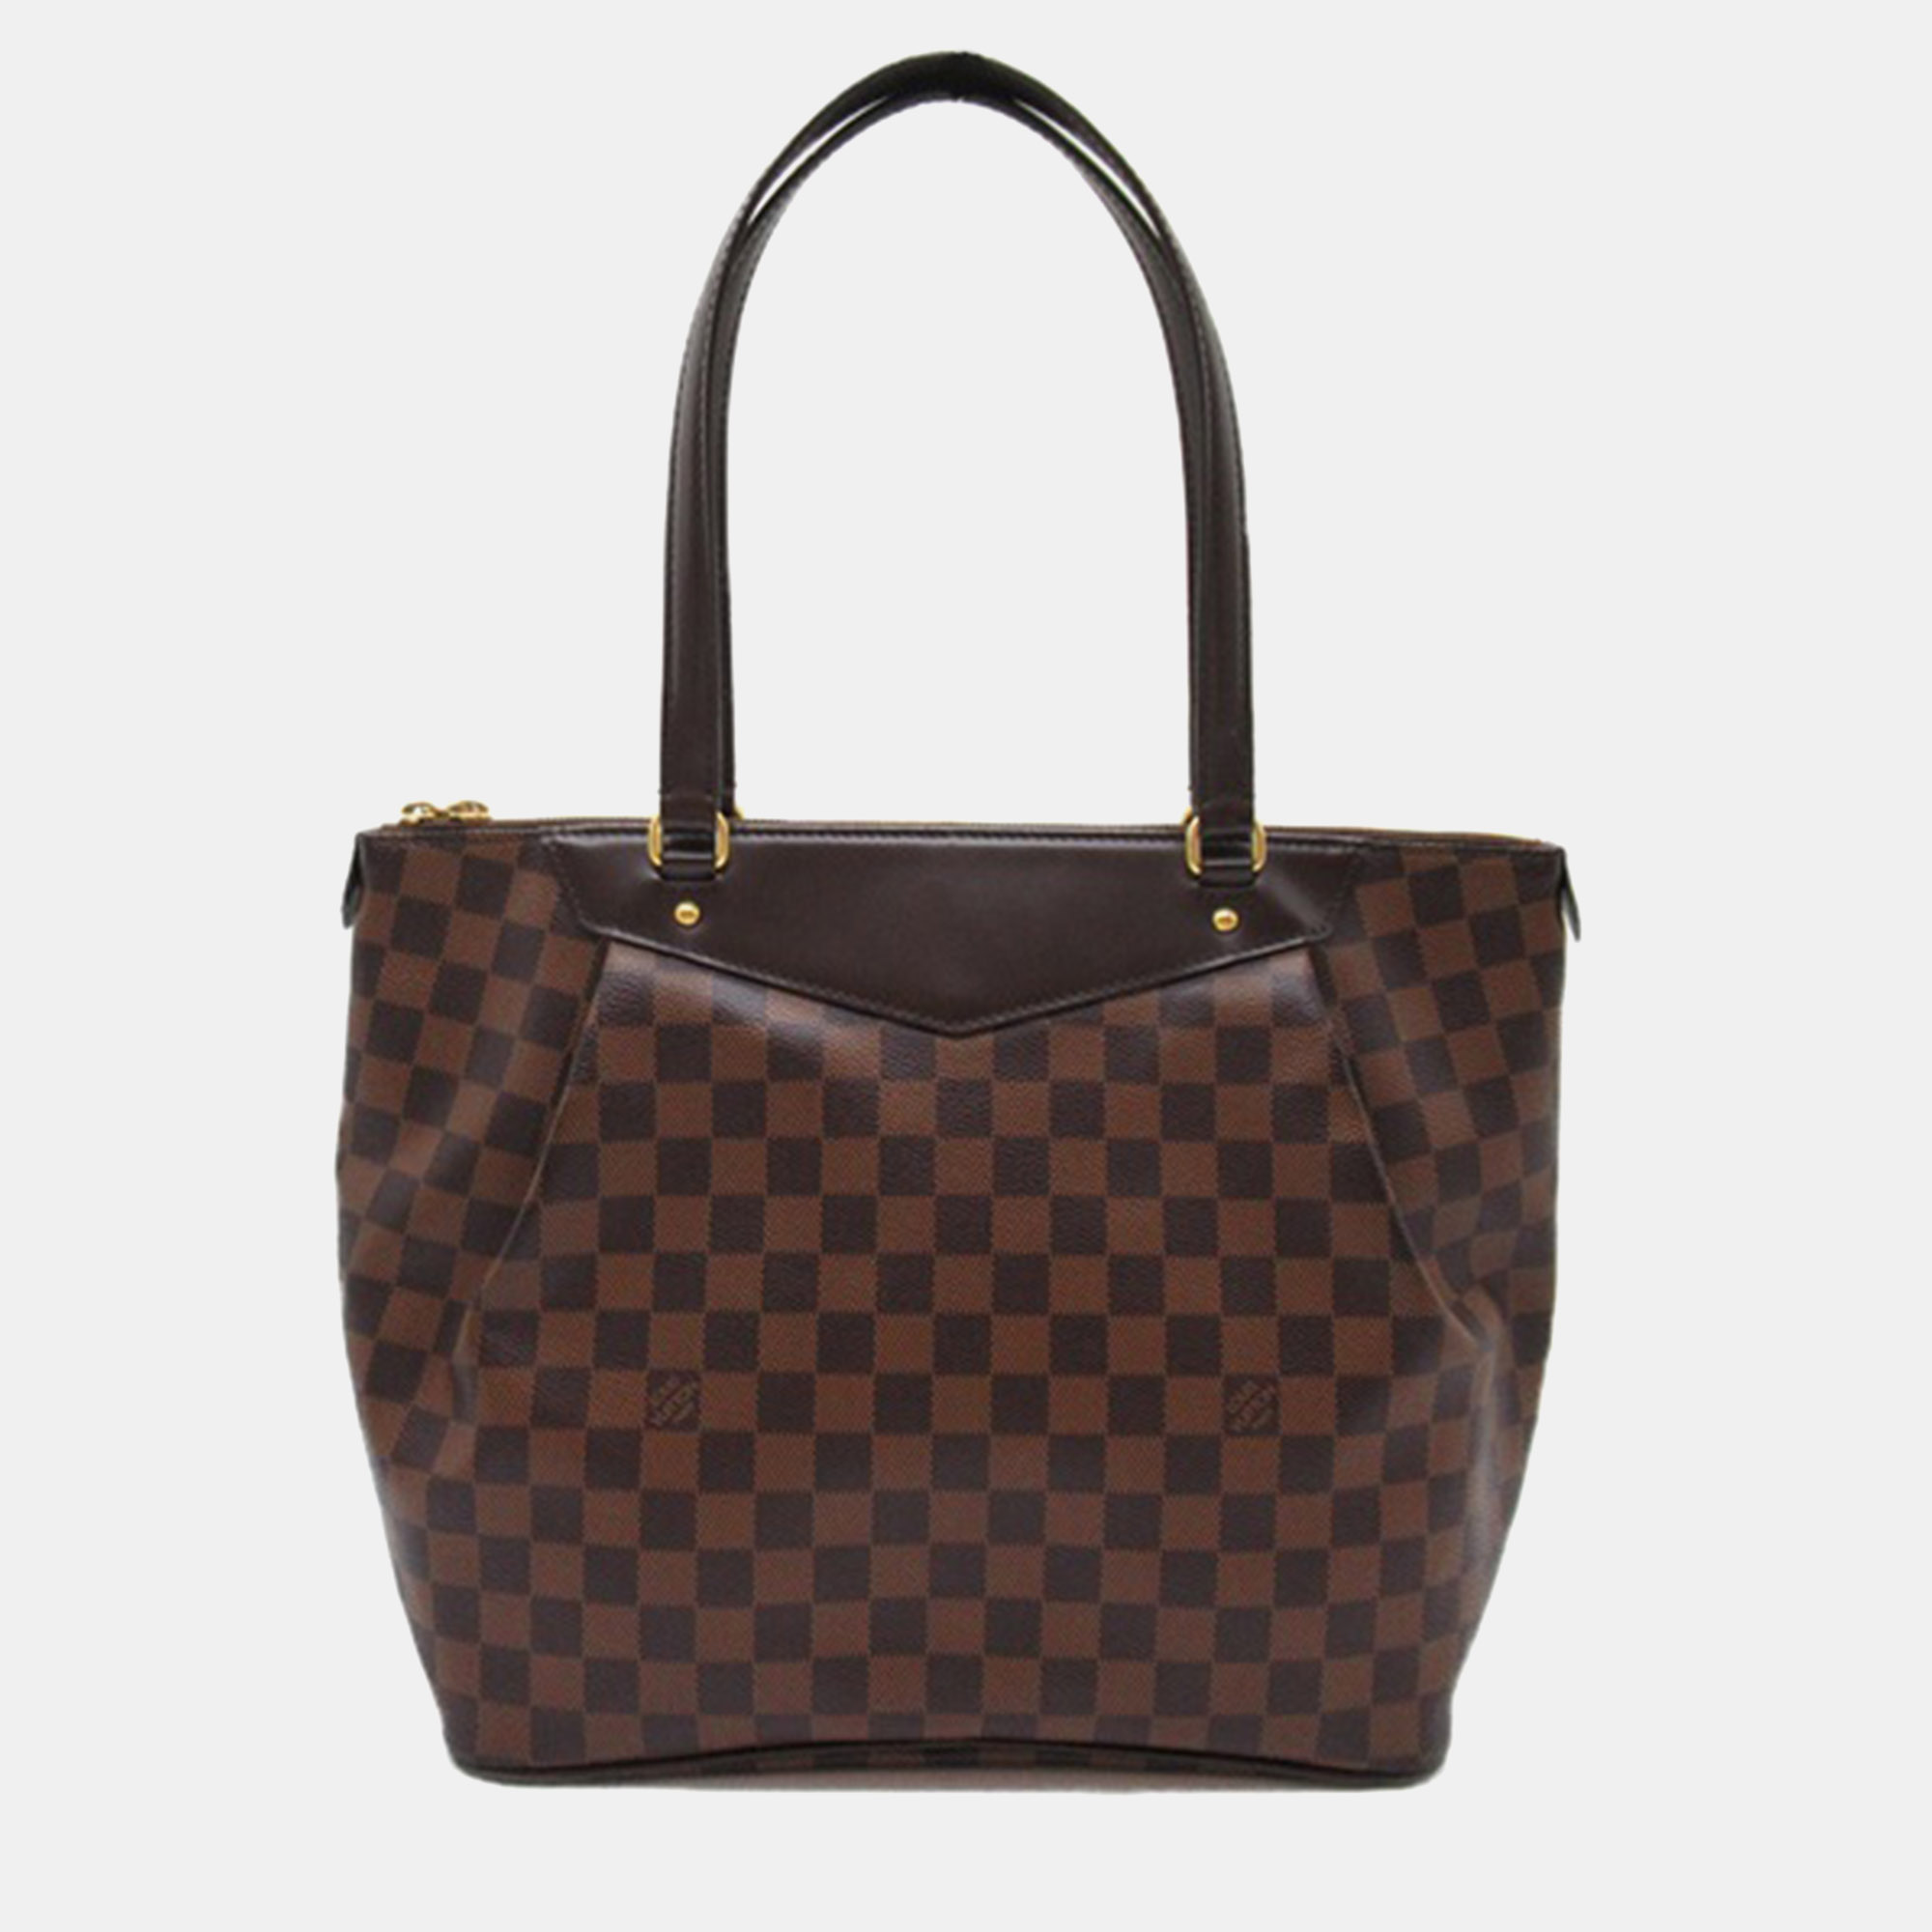 Pre-owned Louis Vuitton Brown Damier Ebene Canvas Westminister Gm Tote Bag